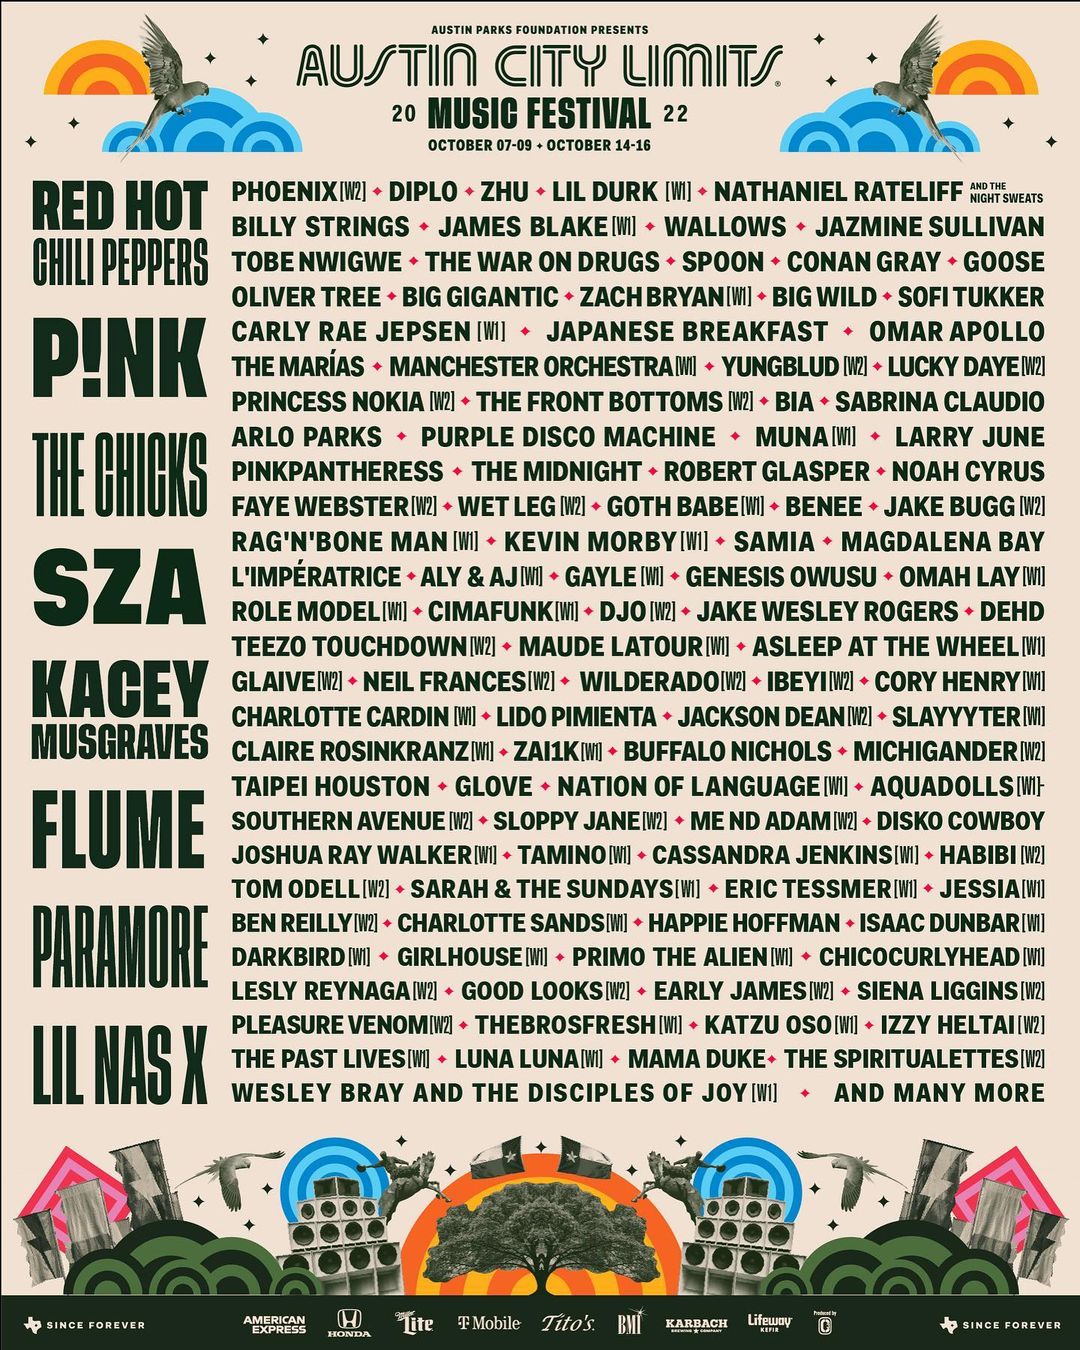 I’m so excited to headline #ACLFest this October!! Tickets and more info at aclfestival.com